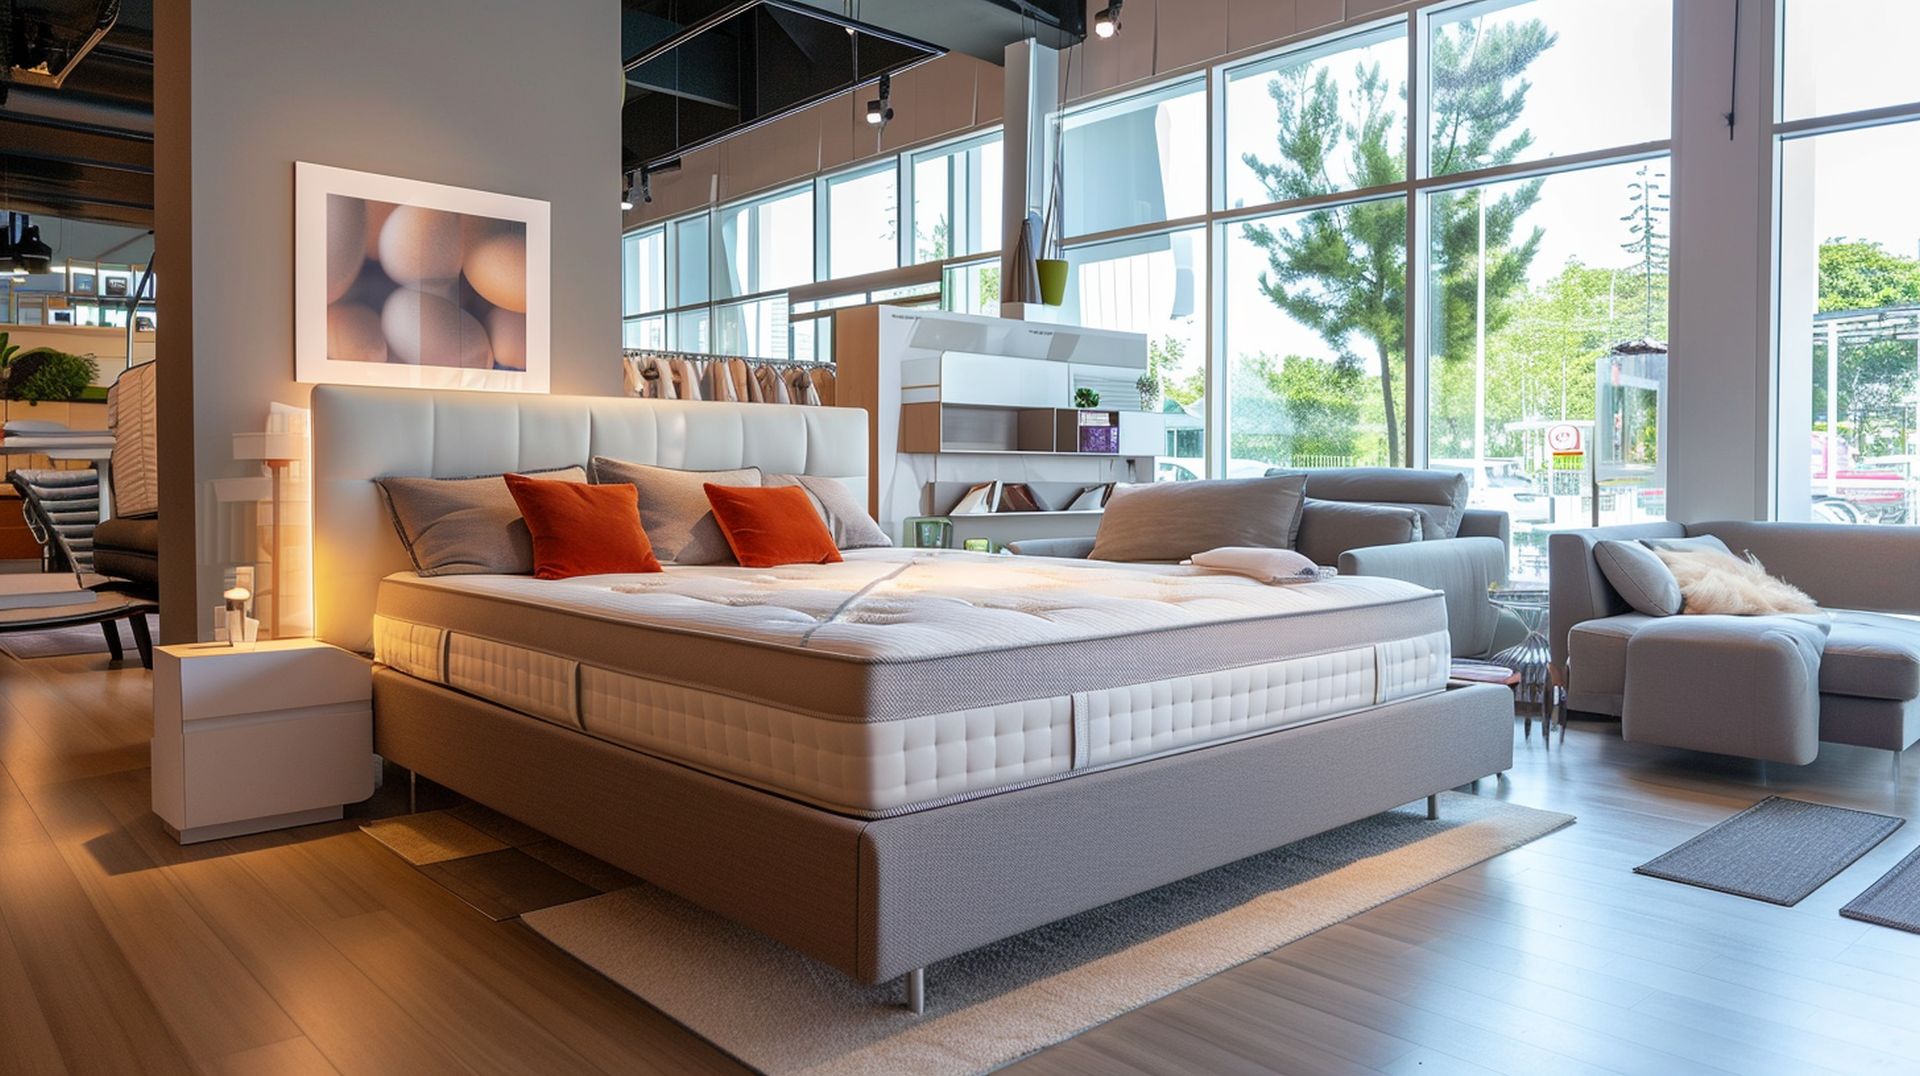 If you're looking for a new bed, mattress stores in Westfield offer the best customer and delivery service, financing, and warranties in Massachusetts